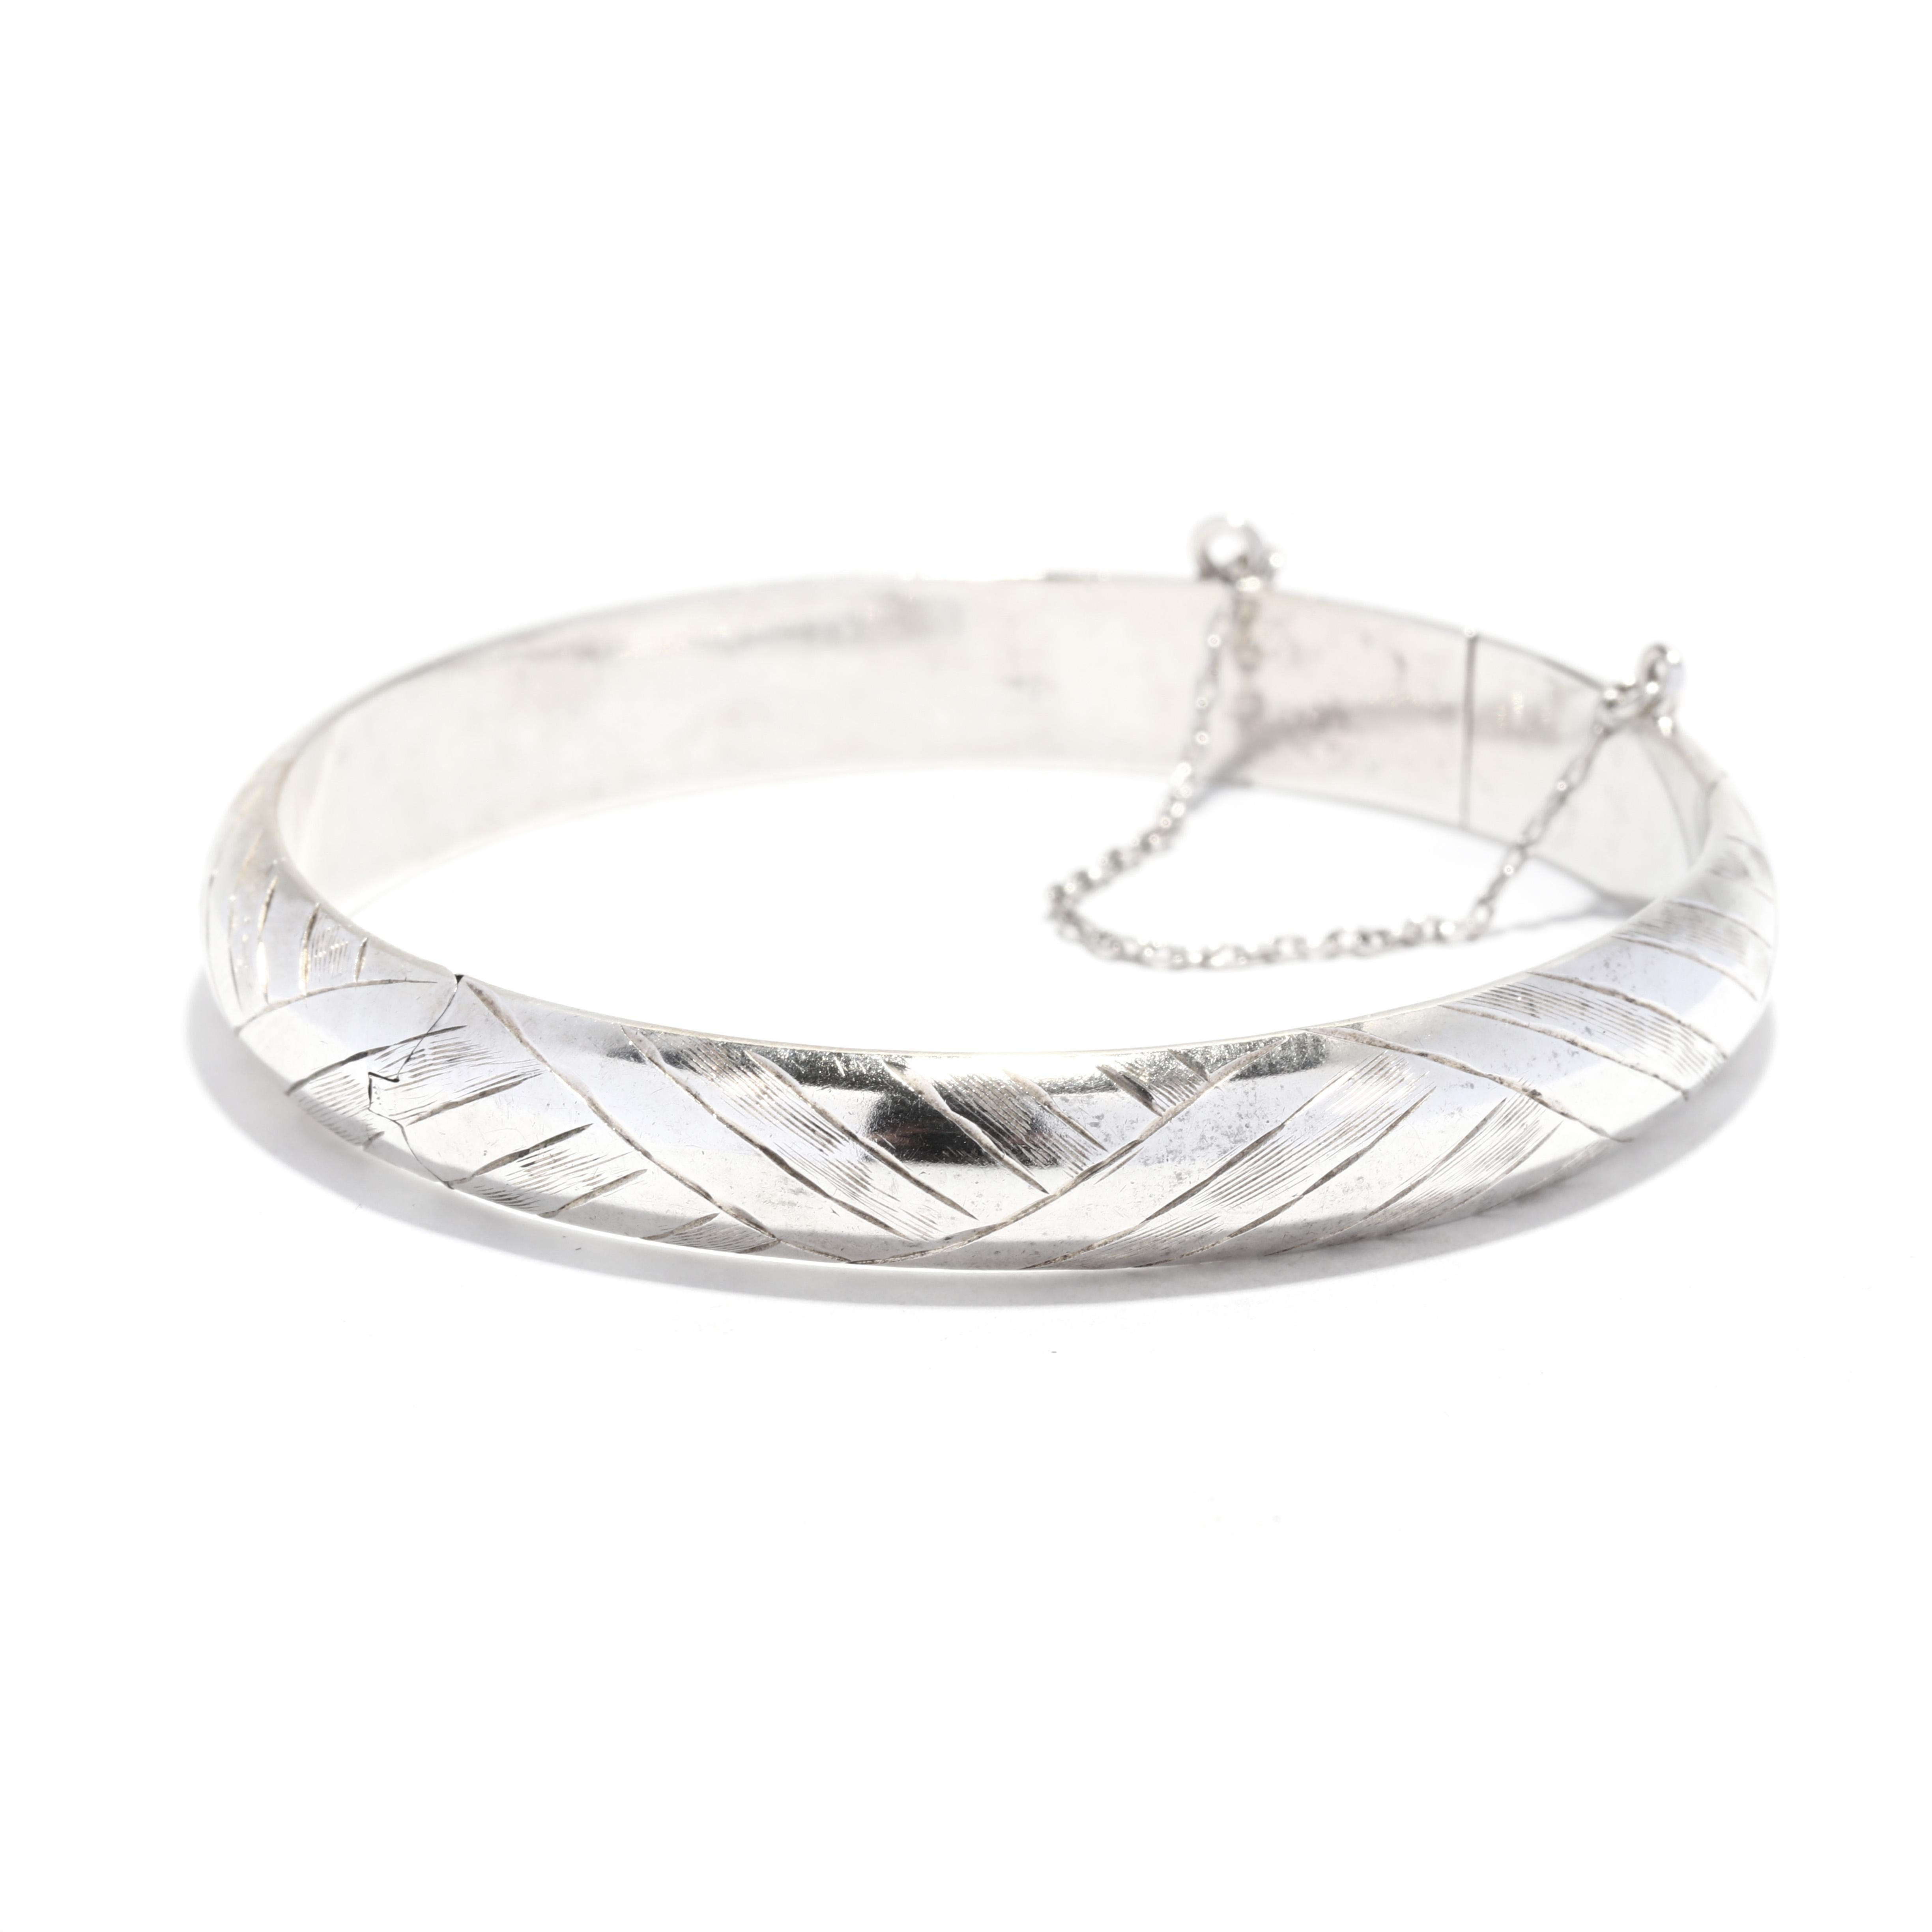 A vintage sterling silver geometric engraved hinged bangle bracelet. This stackable bangle features a domed design with a geometric engraved motif and with a hinged closure and safety chain.

Circumference: 7 in.

Width: 3/8 in.

Weight: 8 dwts. /